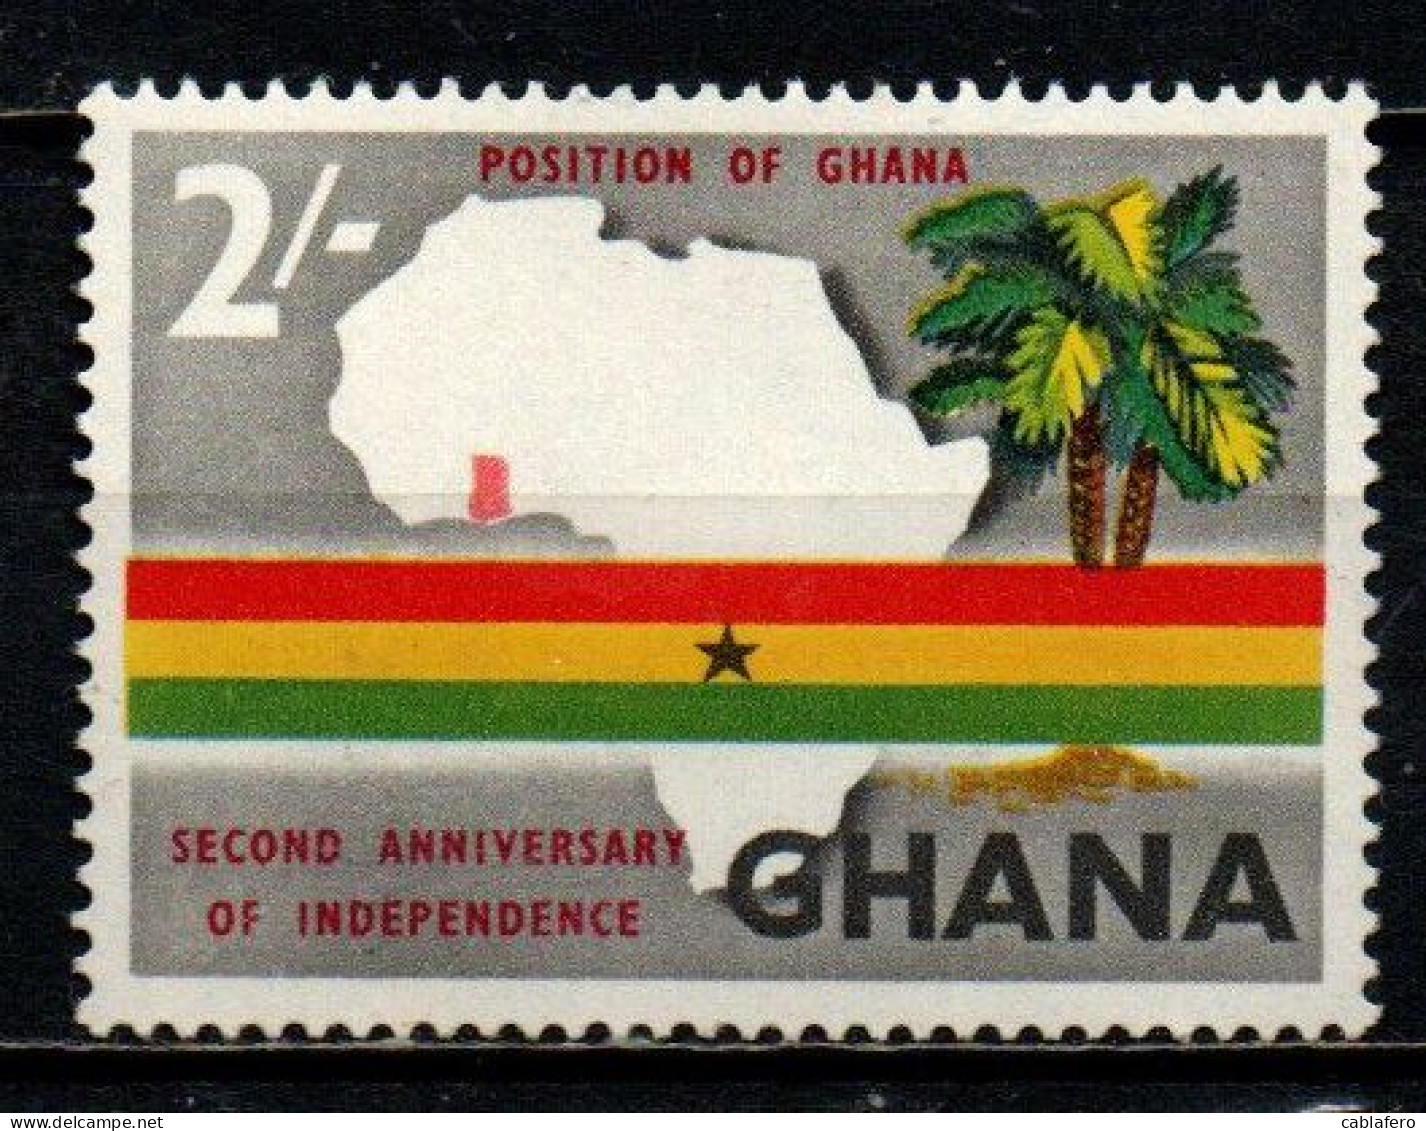 GHANA - 1959 - Map Of Africa, Flag And Palm Tree - Independence, 2nd Anniversary - MNH - Ghana (1957-...)